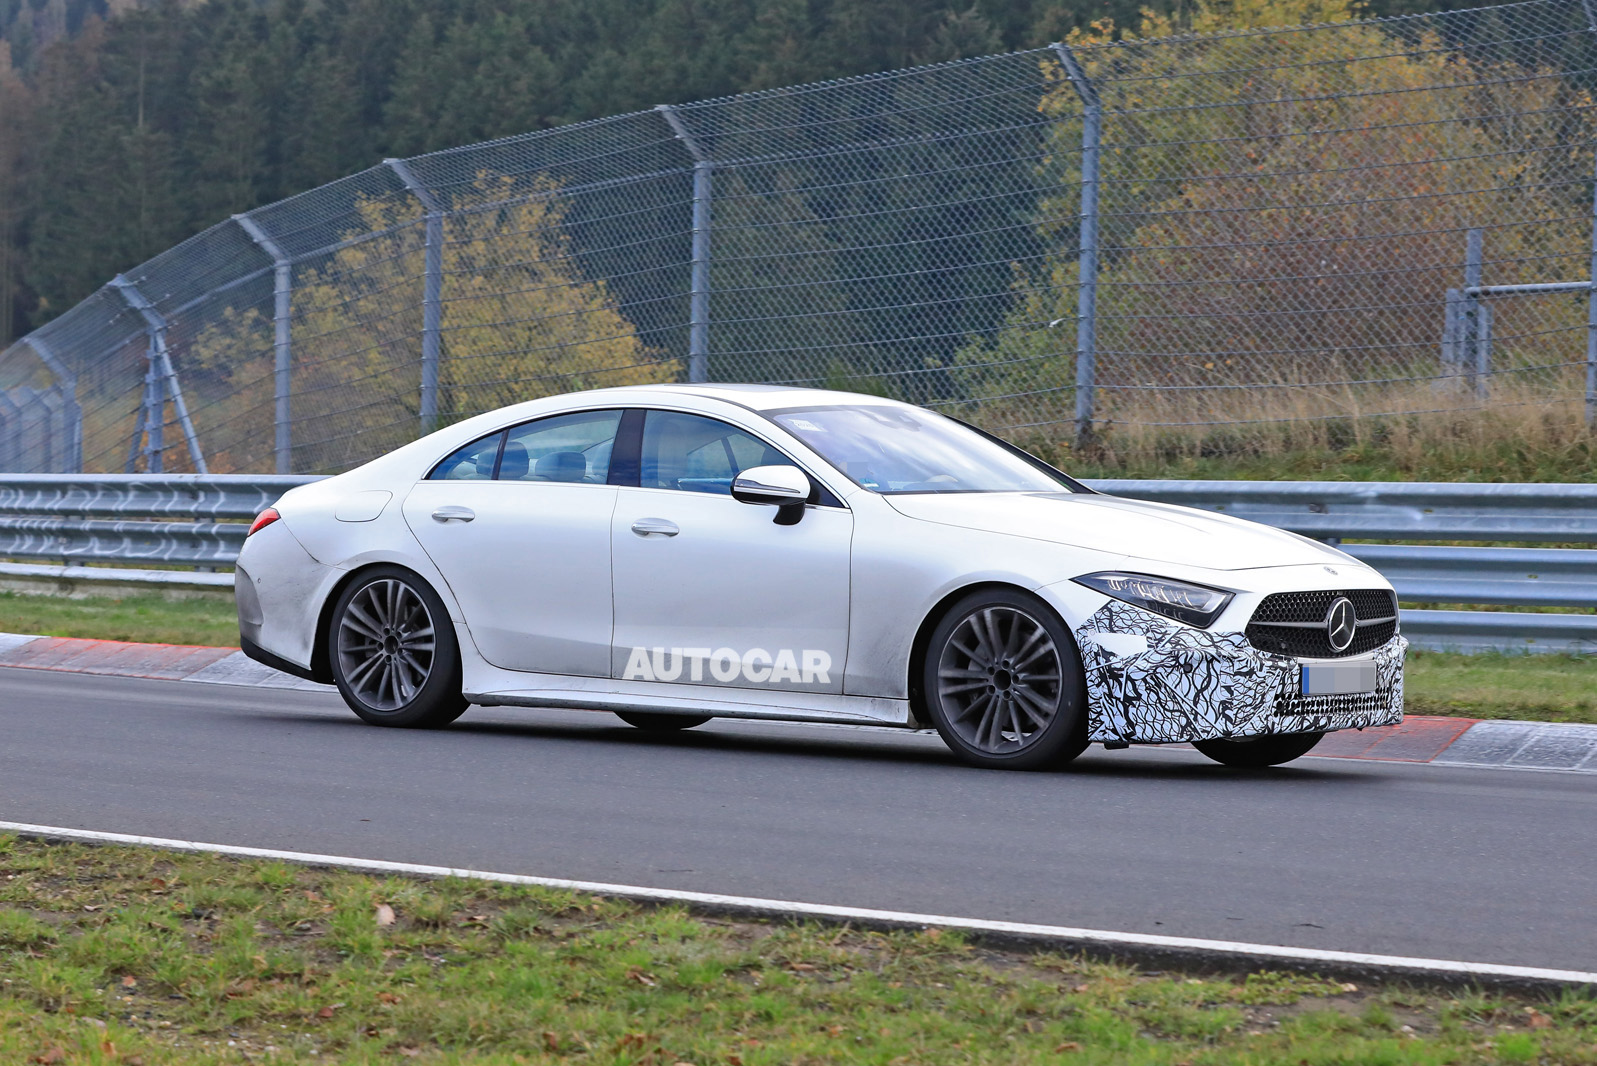 2021 Mercedes-Benz CLS seen testing for the first time